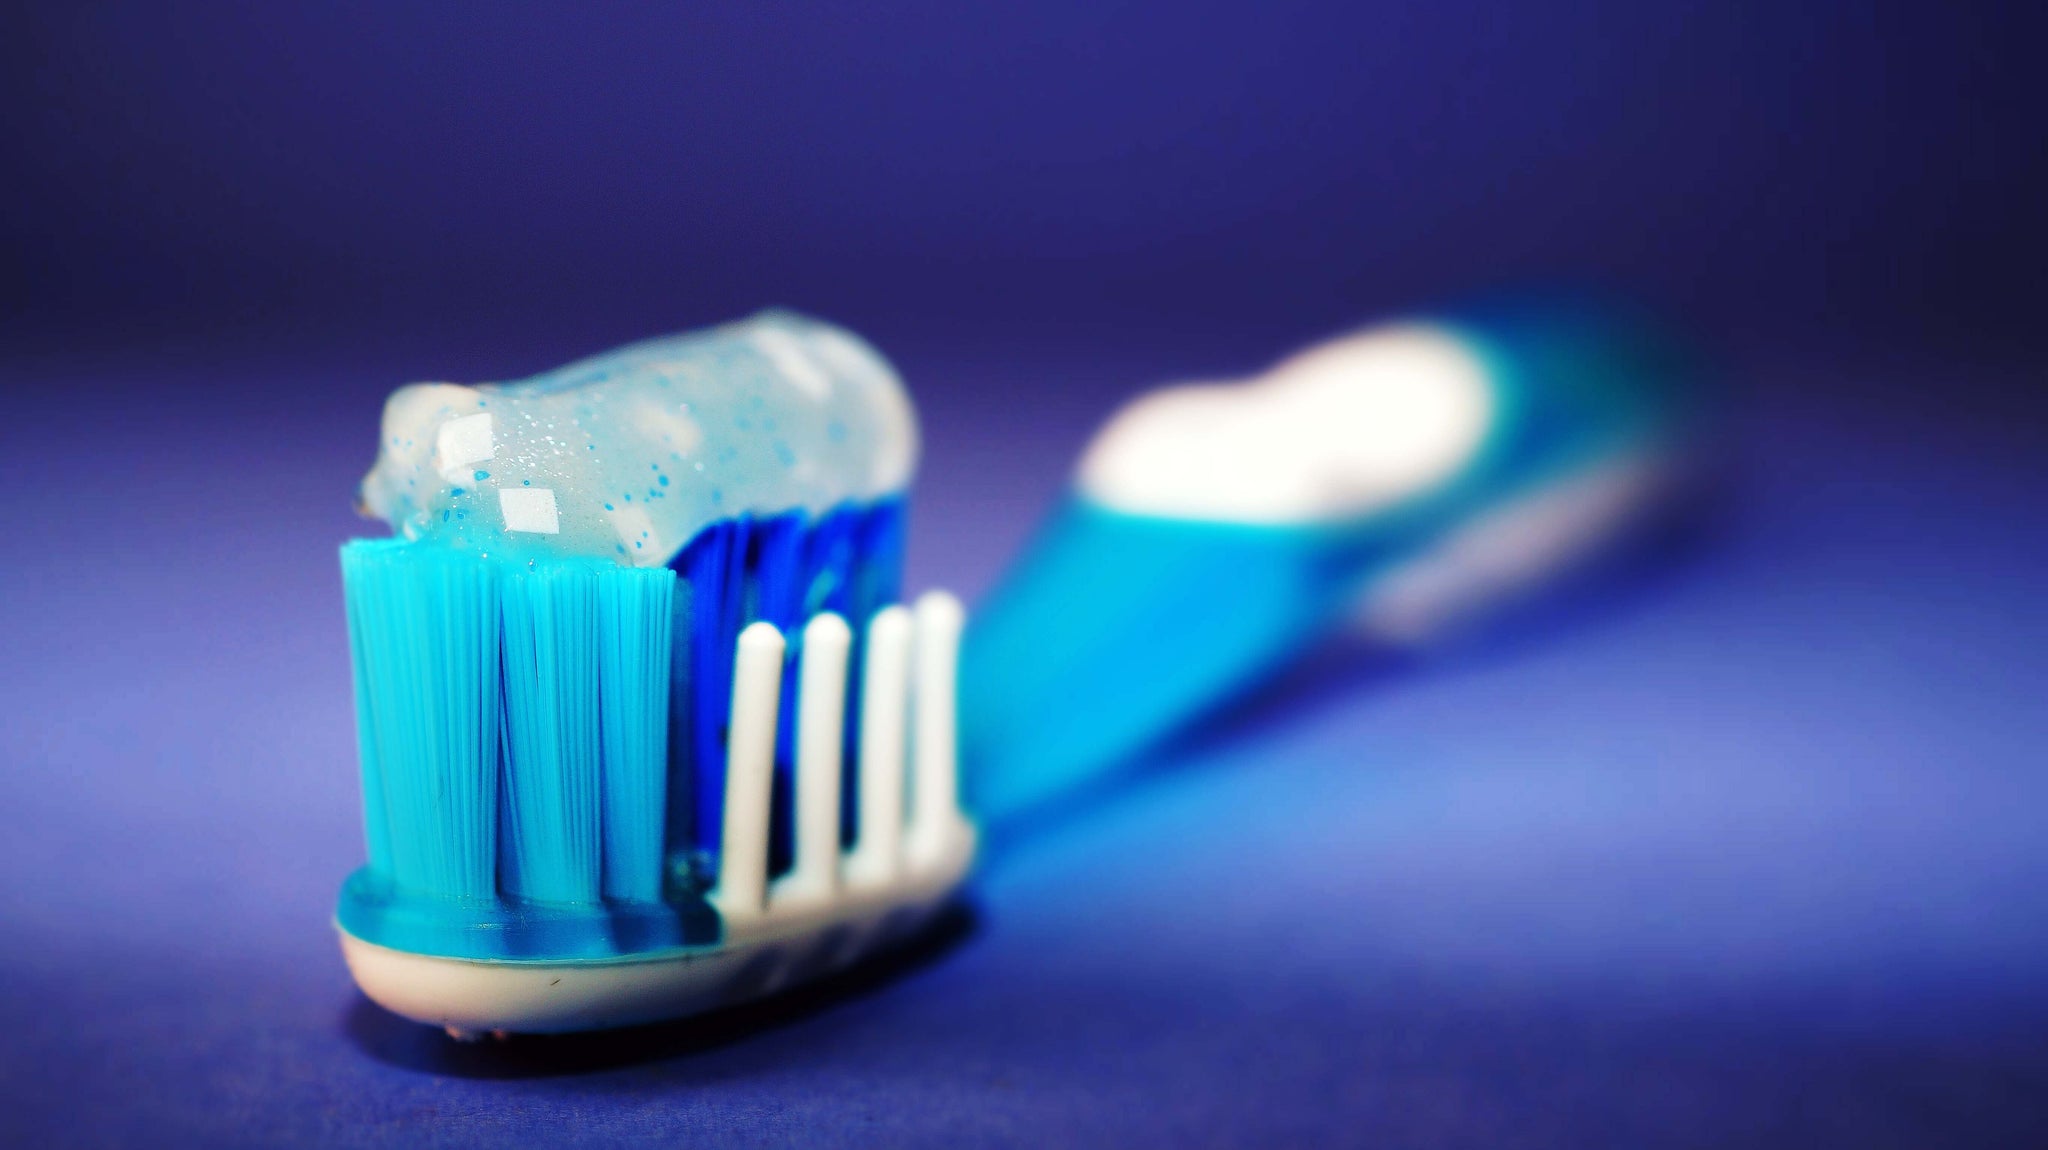 "But it's just a toothbrush - what difference is it going to make?" said 7 billion people.